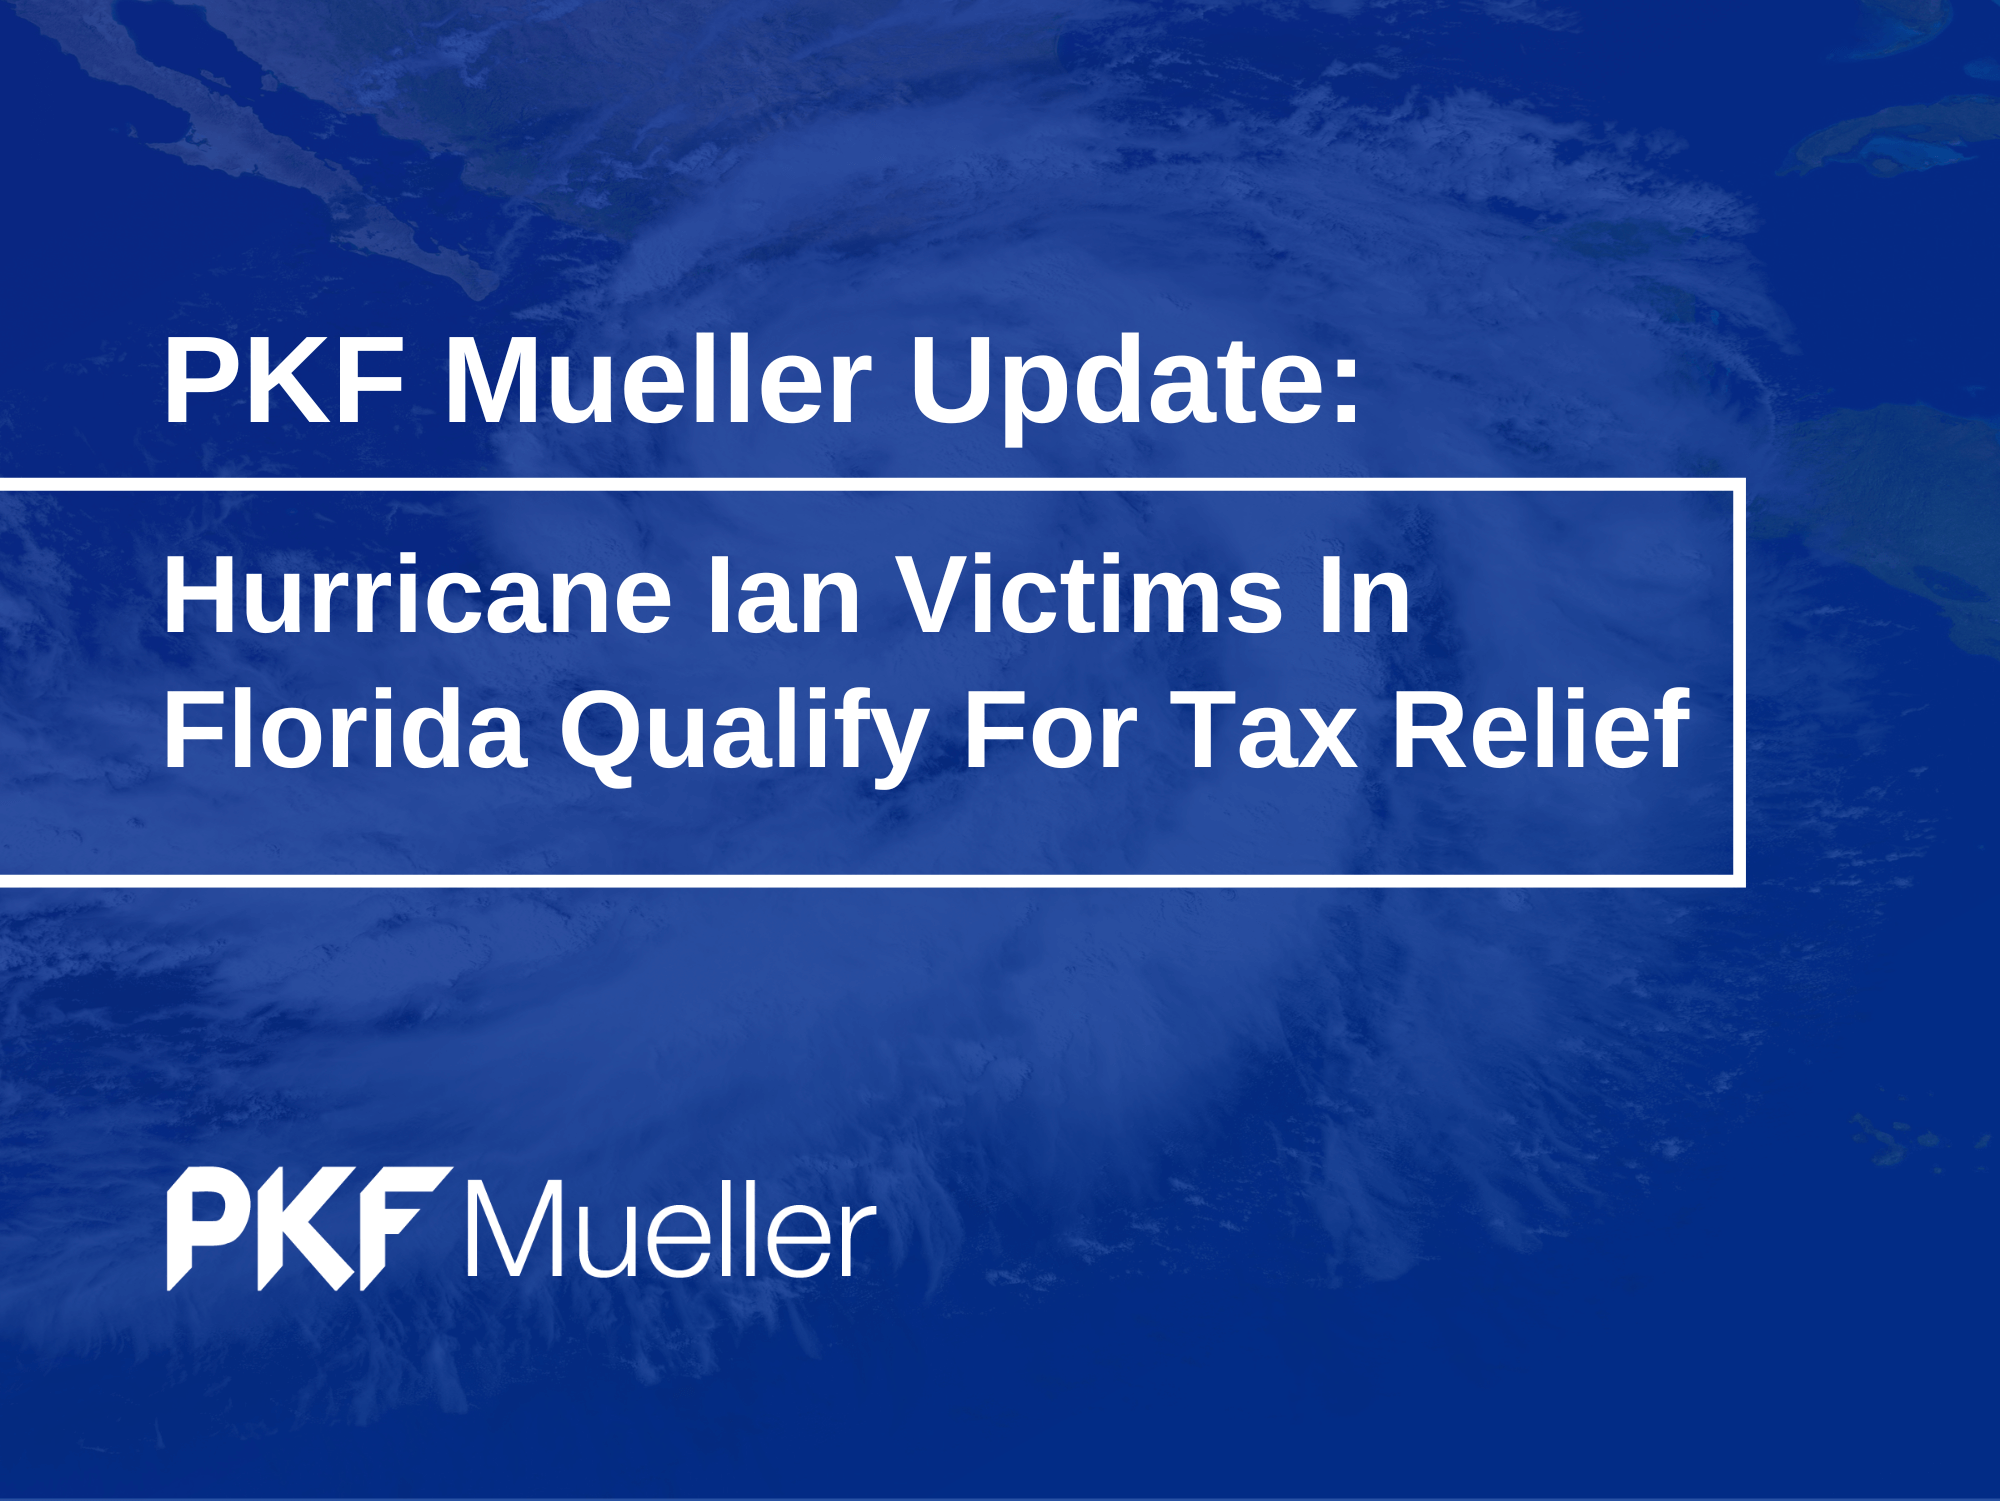 Hurrican Ian Victims In Florida Qualify for Tax Relief